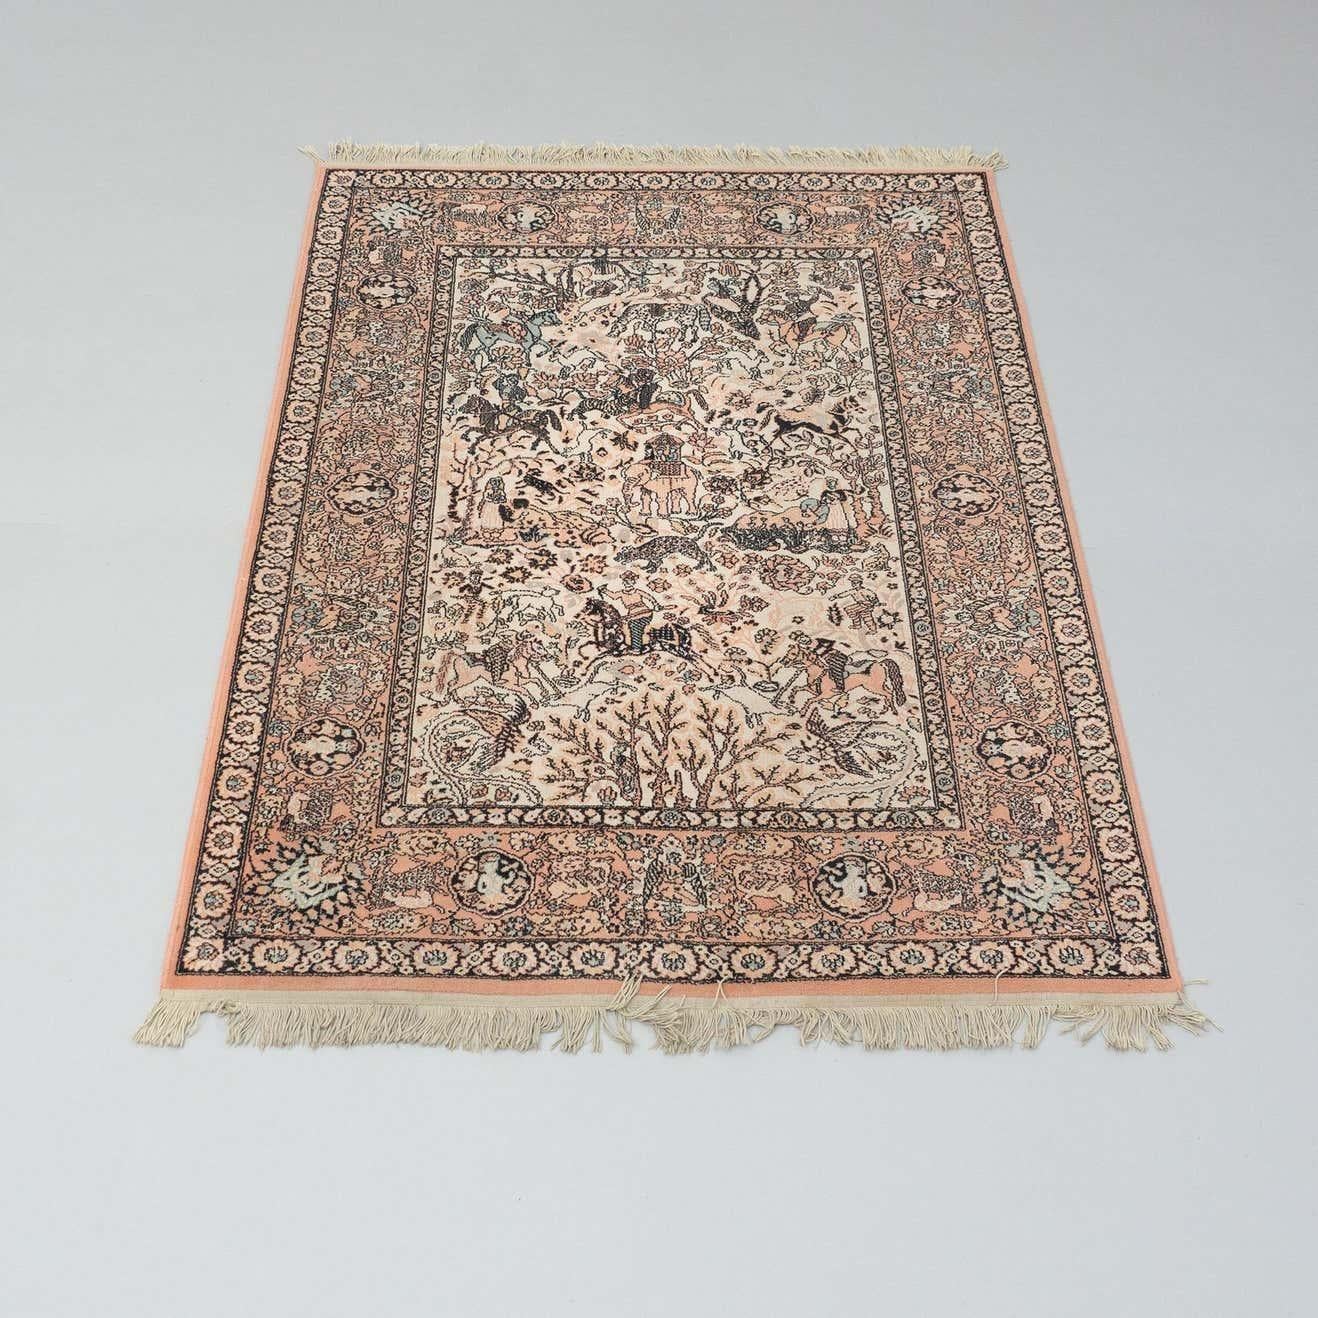 Wool rug manufactured by Aledeco from Spain, circa 1940.

In original condition, with minor wear consistent with age and use, preserving a beautiful patina.

Material:
Wool

Dimensions:
D 0.6 cm x W 200 cm x H 150 cm.